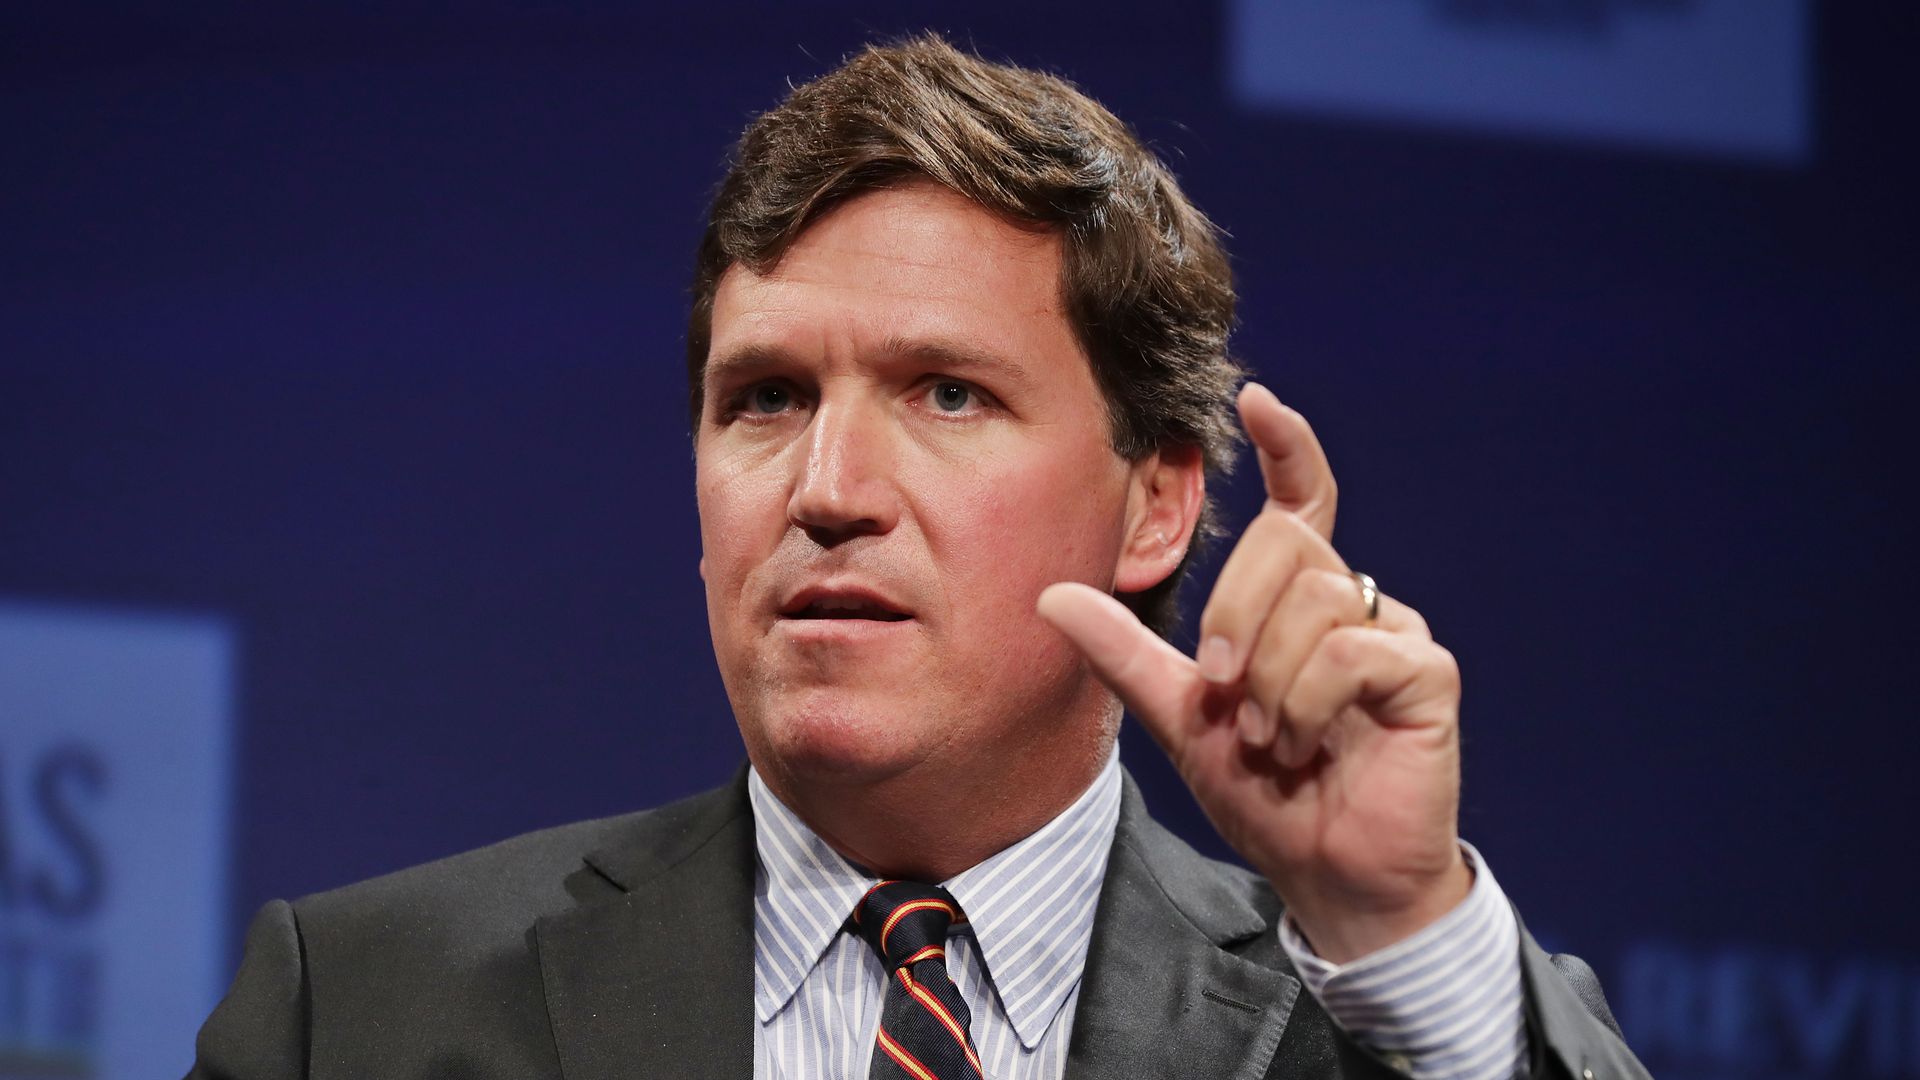 Fox News host Tucker Carlson discusses 'Populism and the Right' during the National Review Institute's Ideas Summit at the Mandarin Oriental Hotel March 29